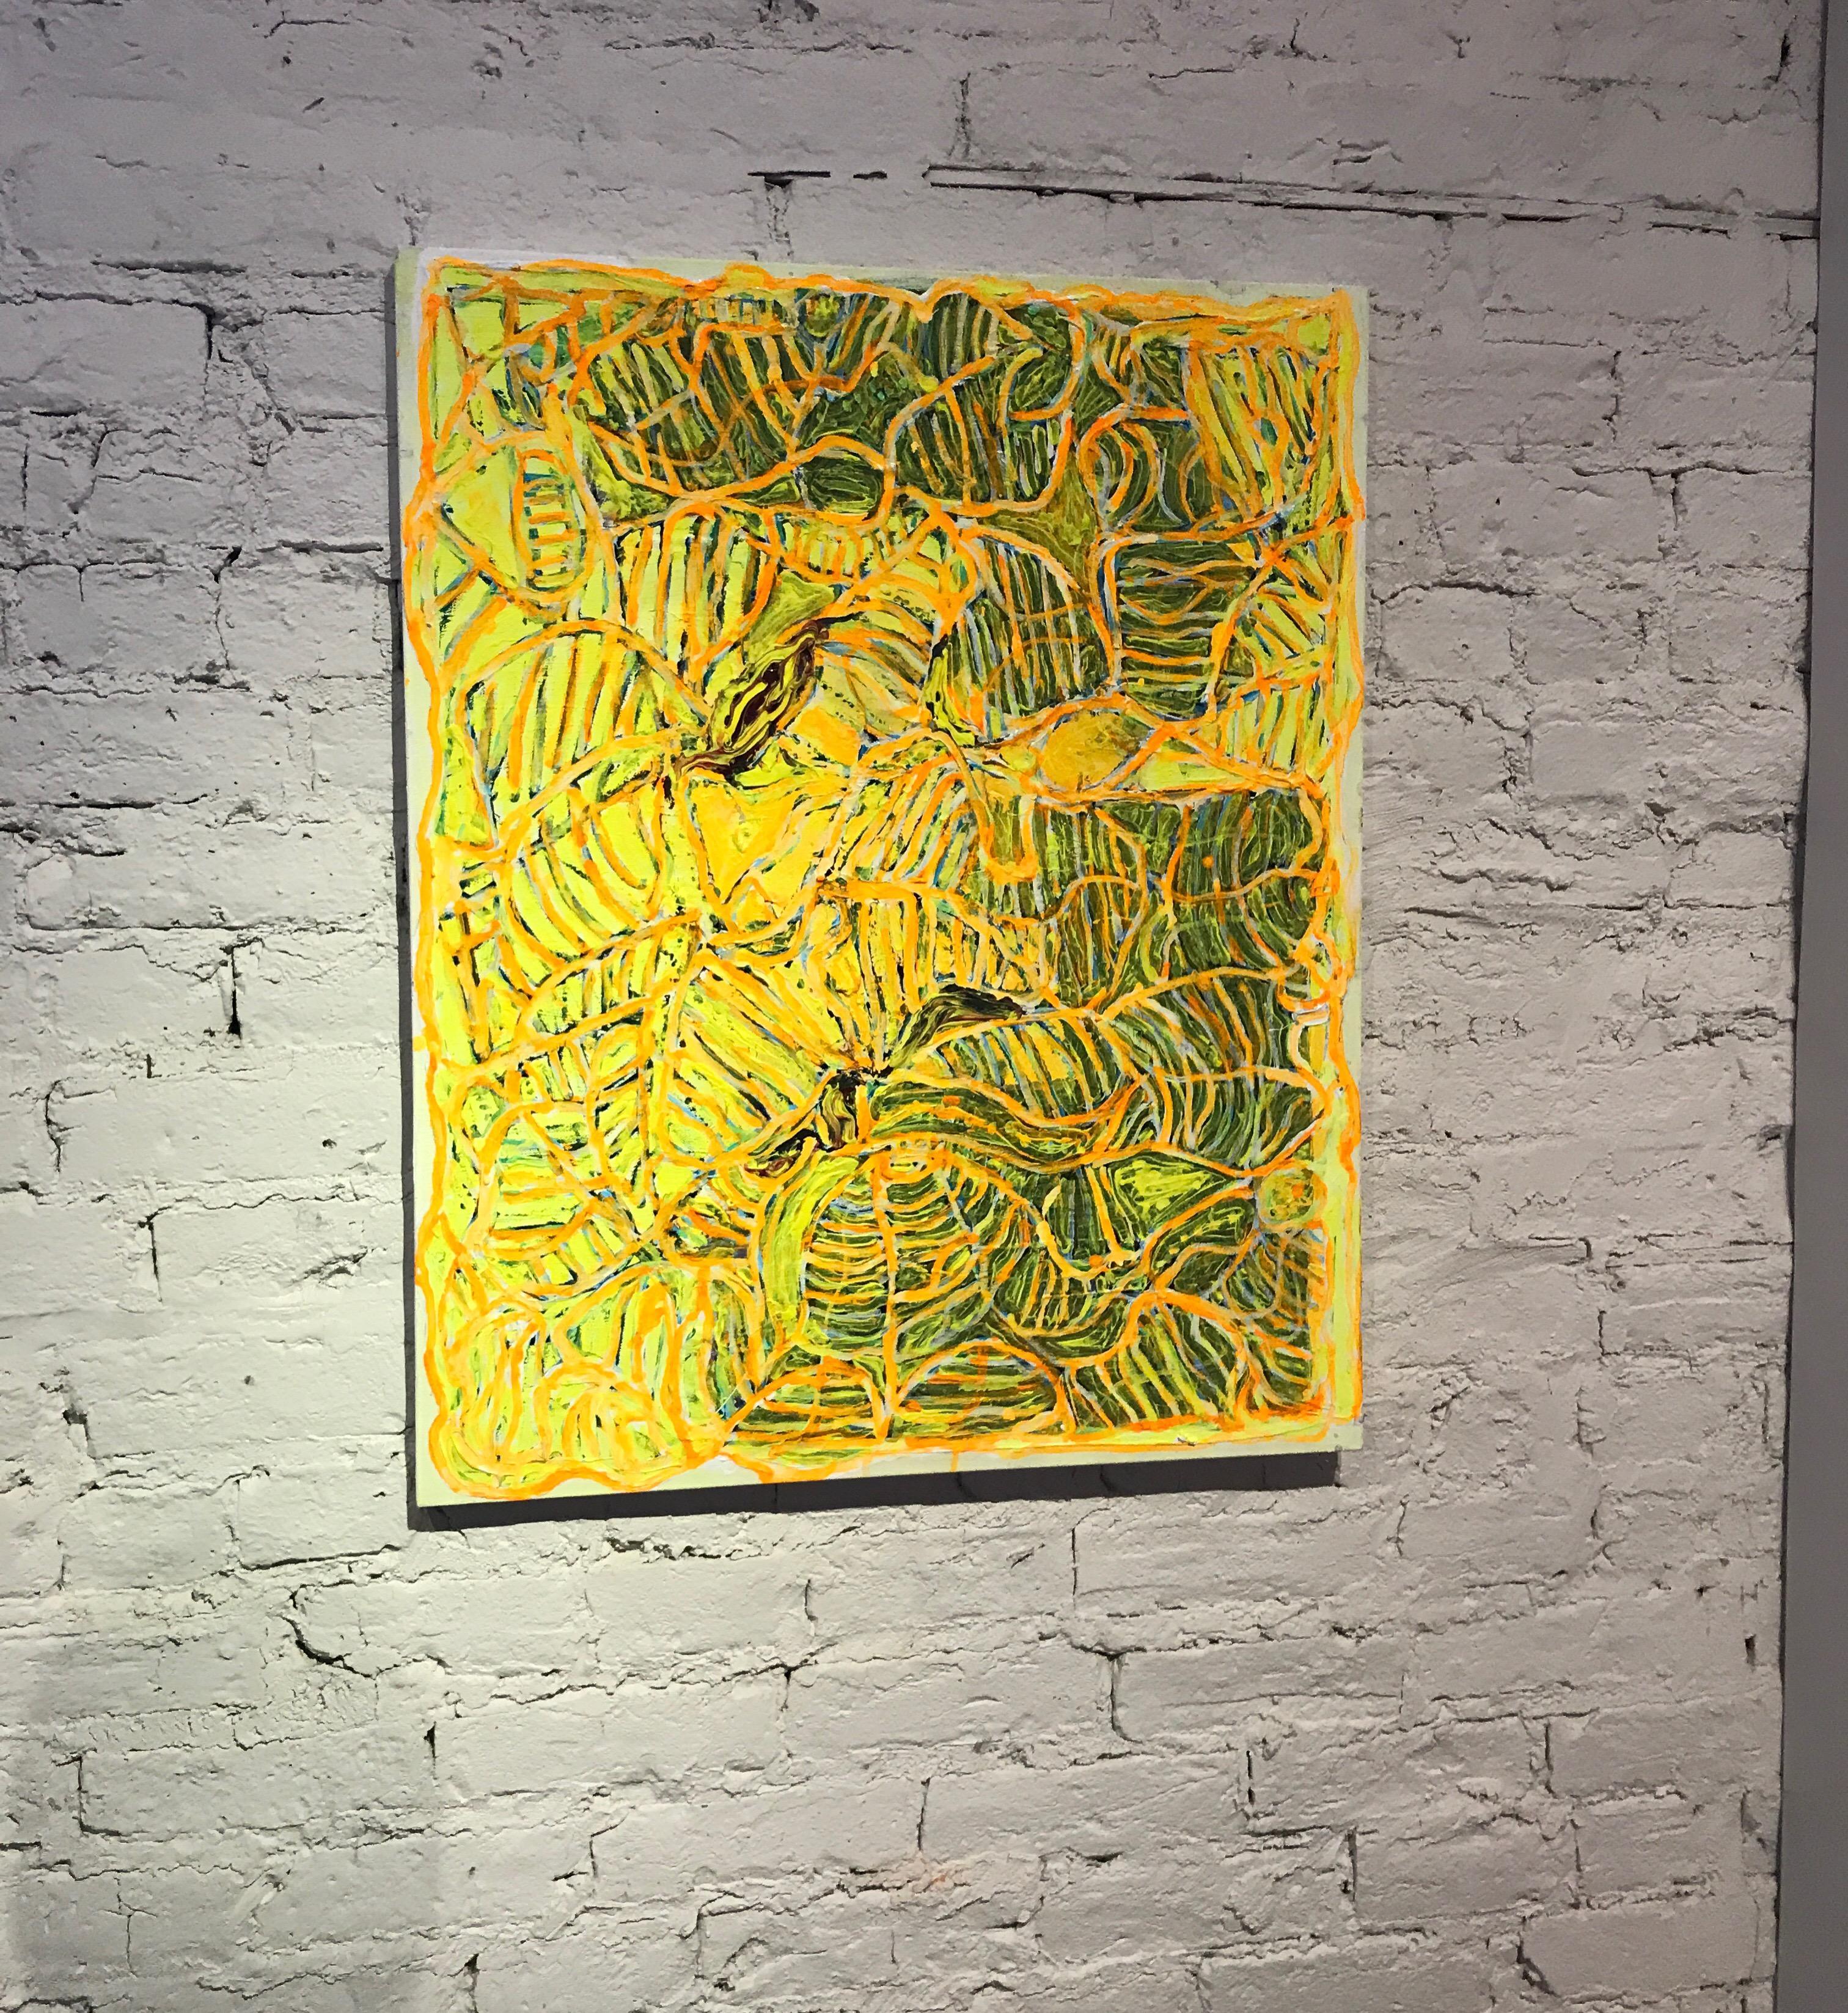 Abstract yellow modern painting by Chicago artist Jay Miller.
The energetic work is rendered in highly layered brushstrokes.
May be hung horizontally or vertically.